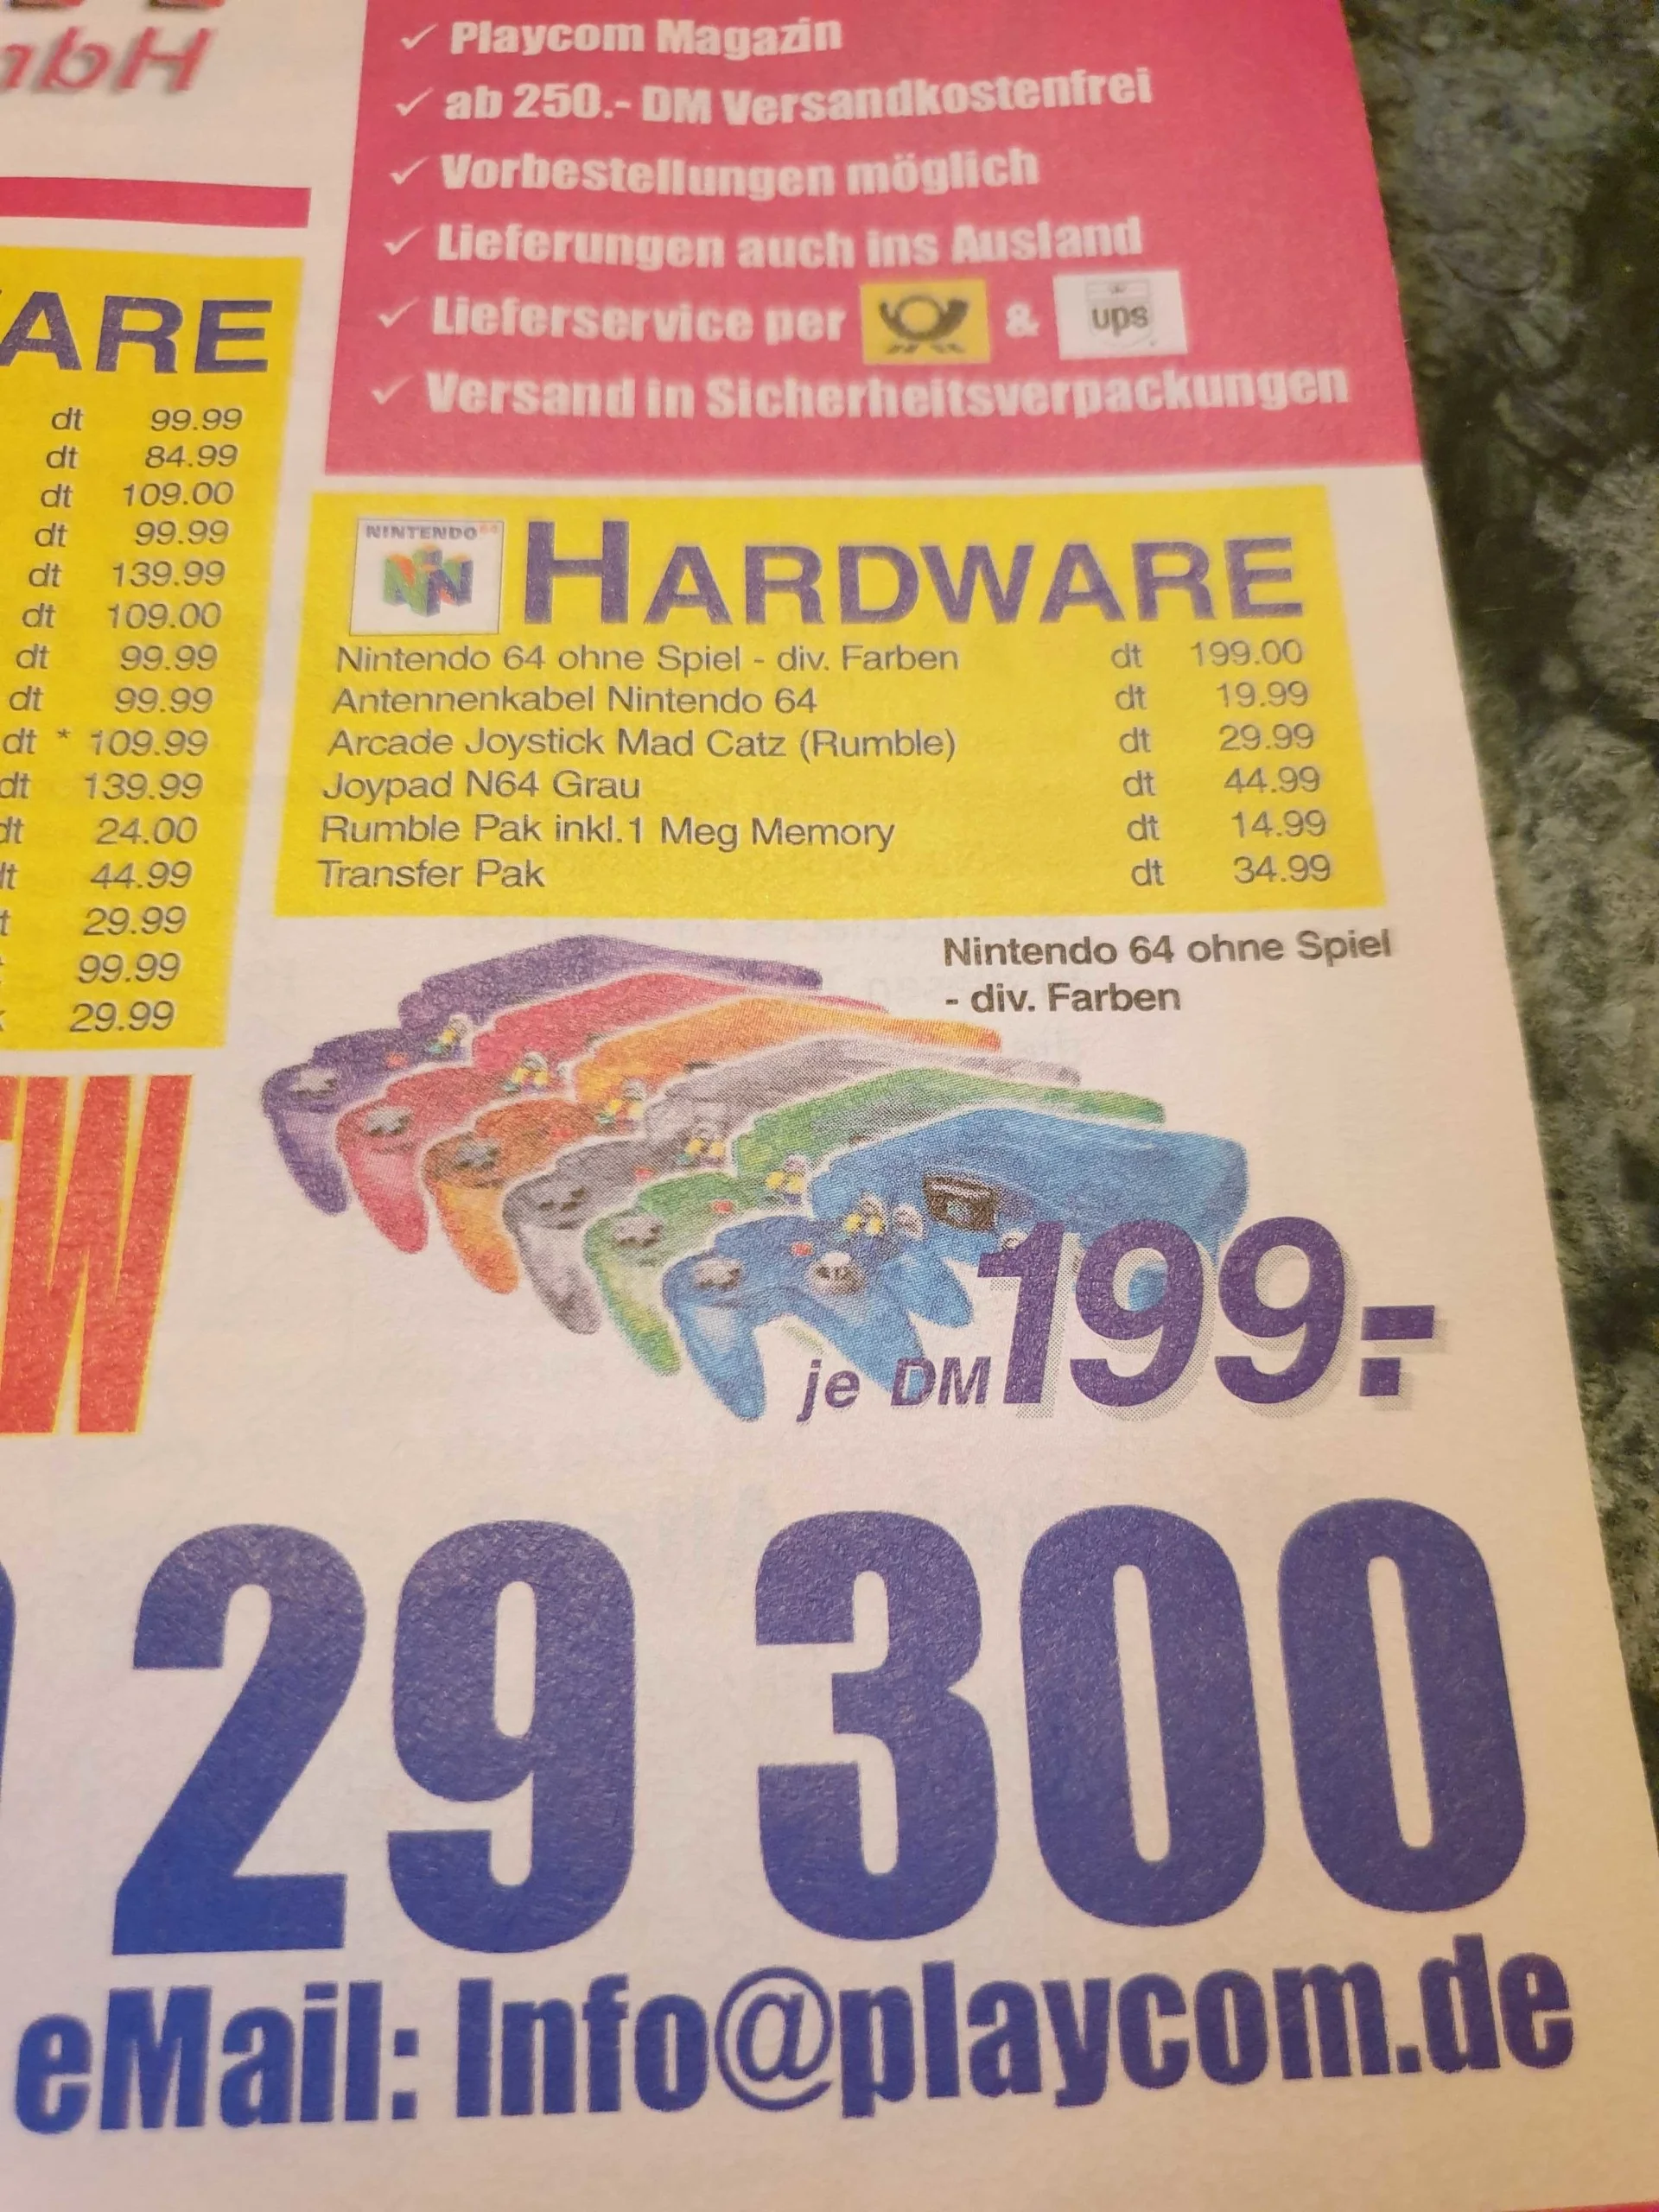 Ordering Video Game Consoles from Magazines in 1998